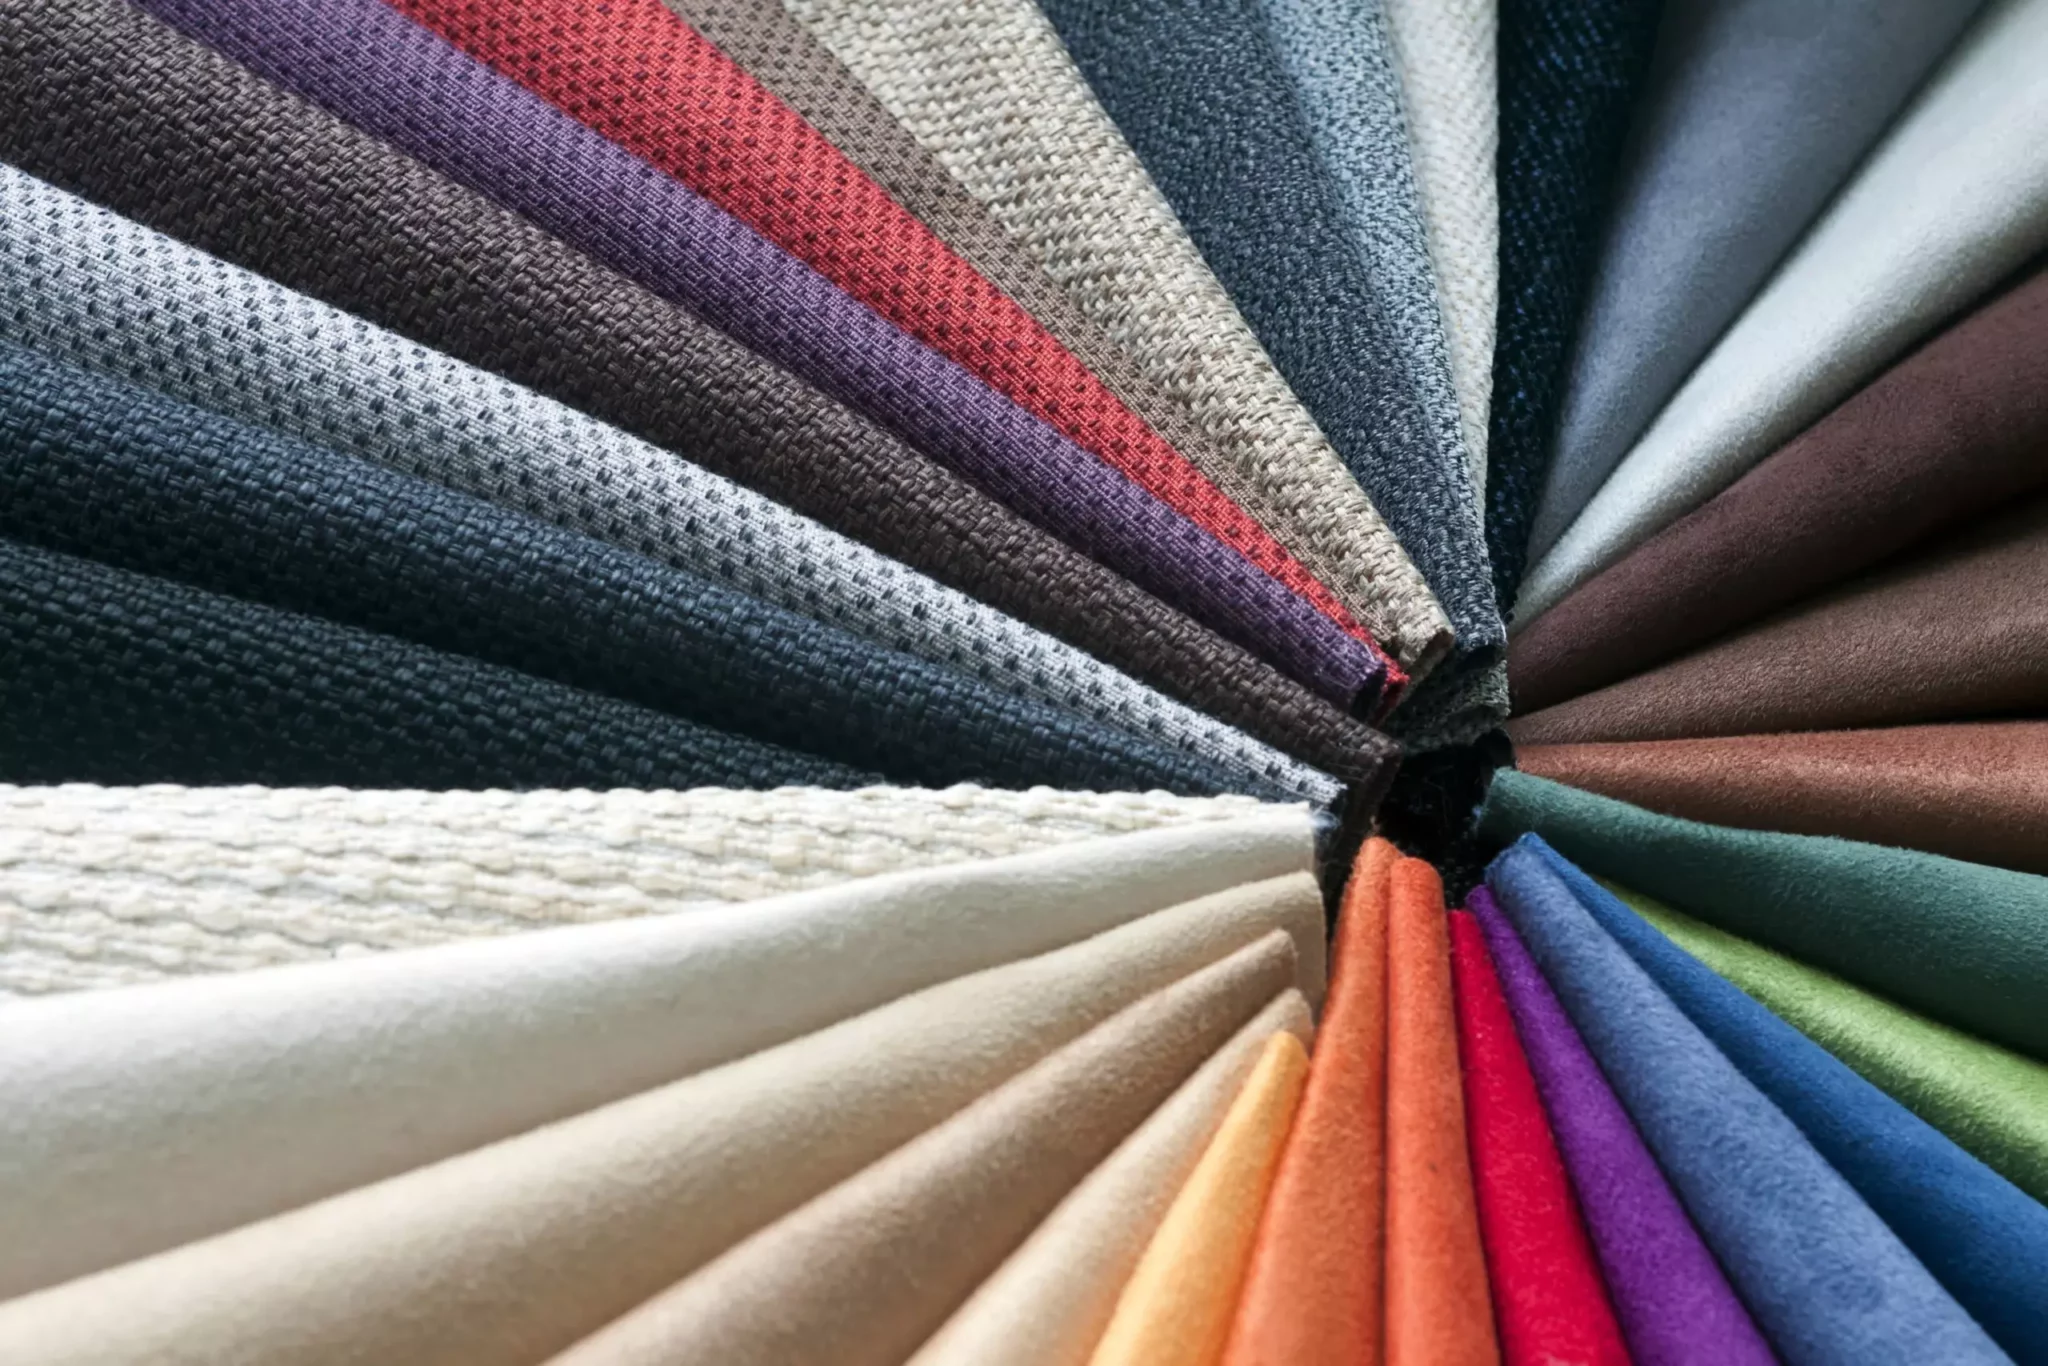 Which Upholstery Fabric is the Most Durable?